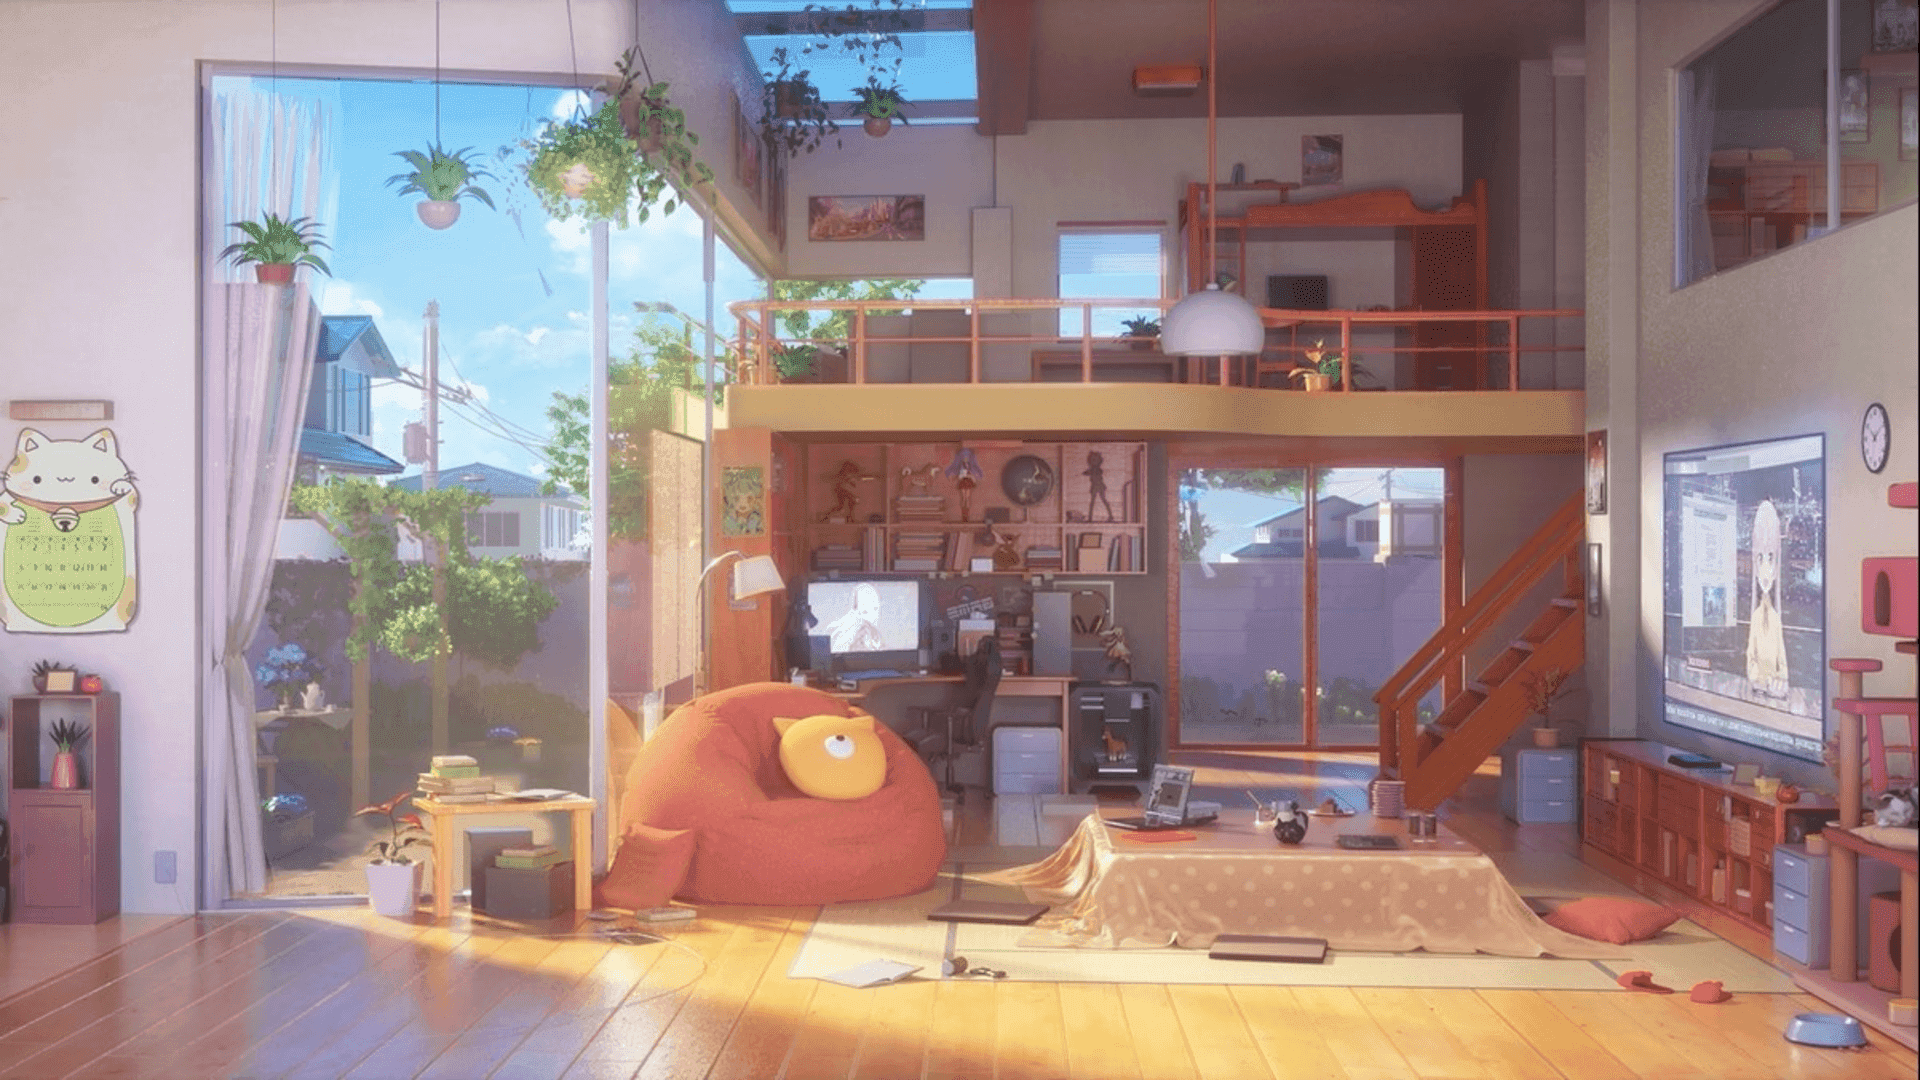 Download Unwind and Relax in this Cozy Anime Room | Wallpapers.com